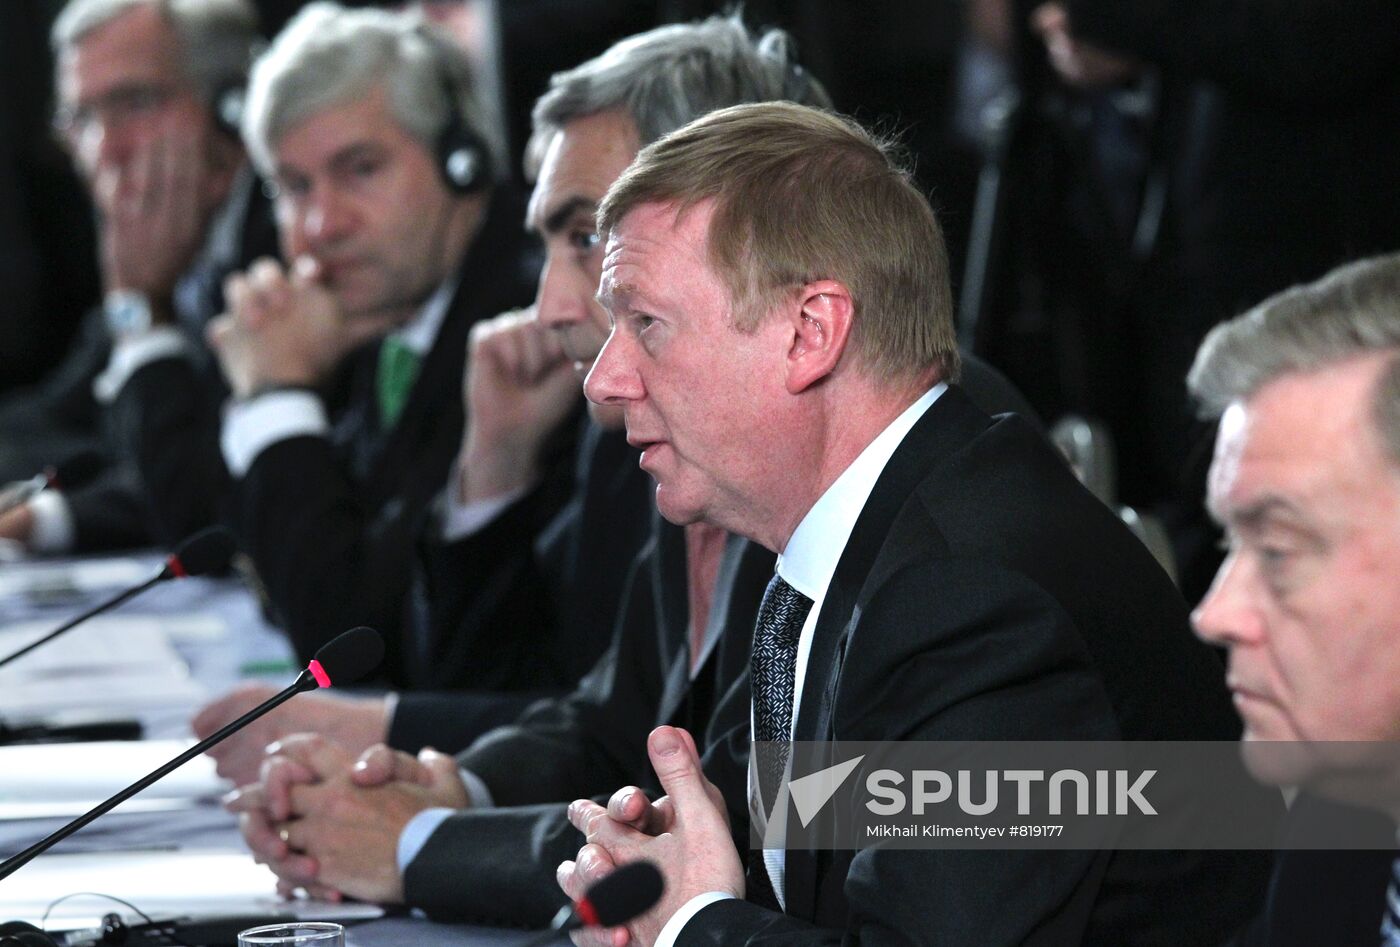 Anatoly Chubais in Brussels